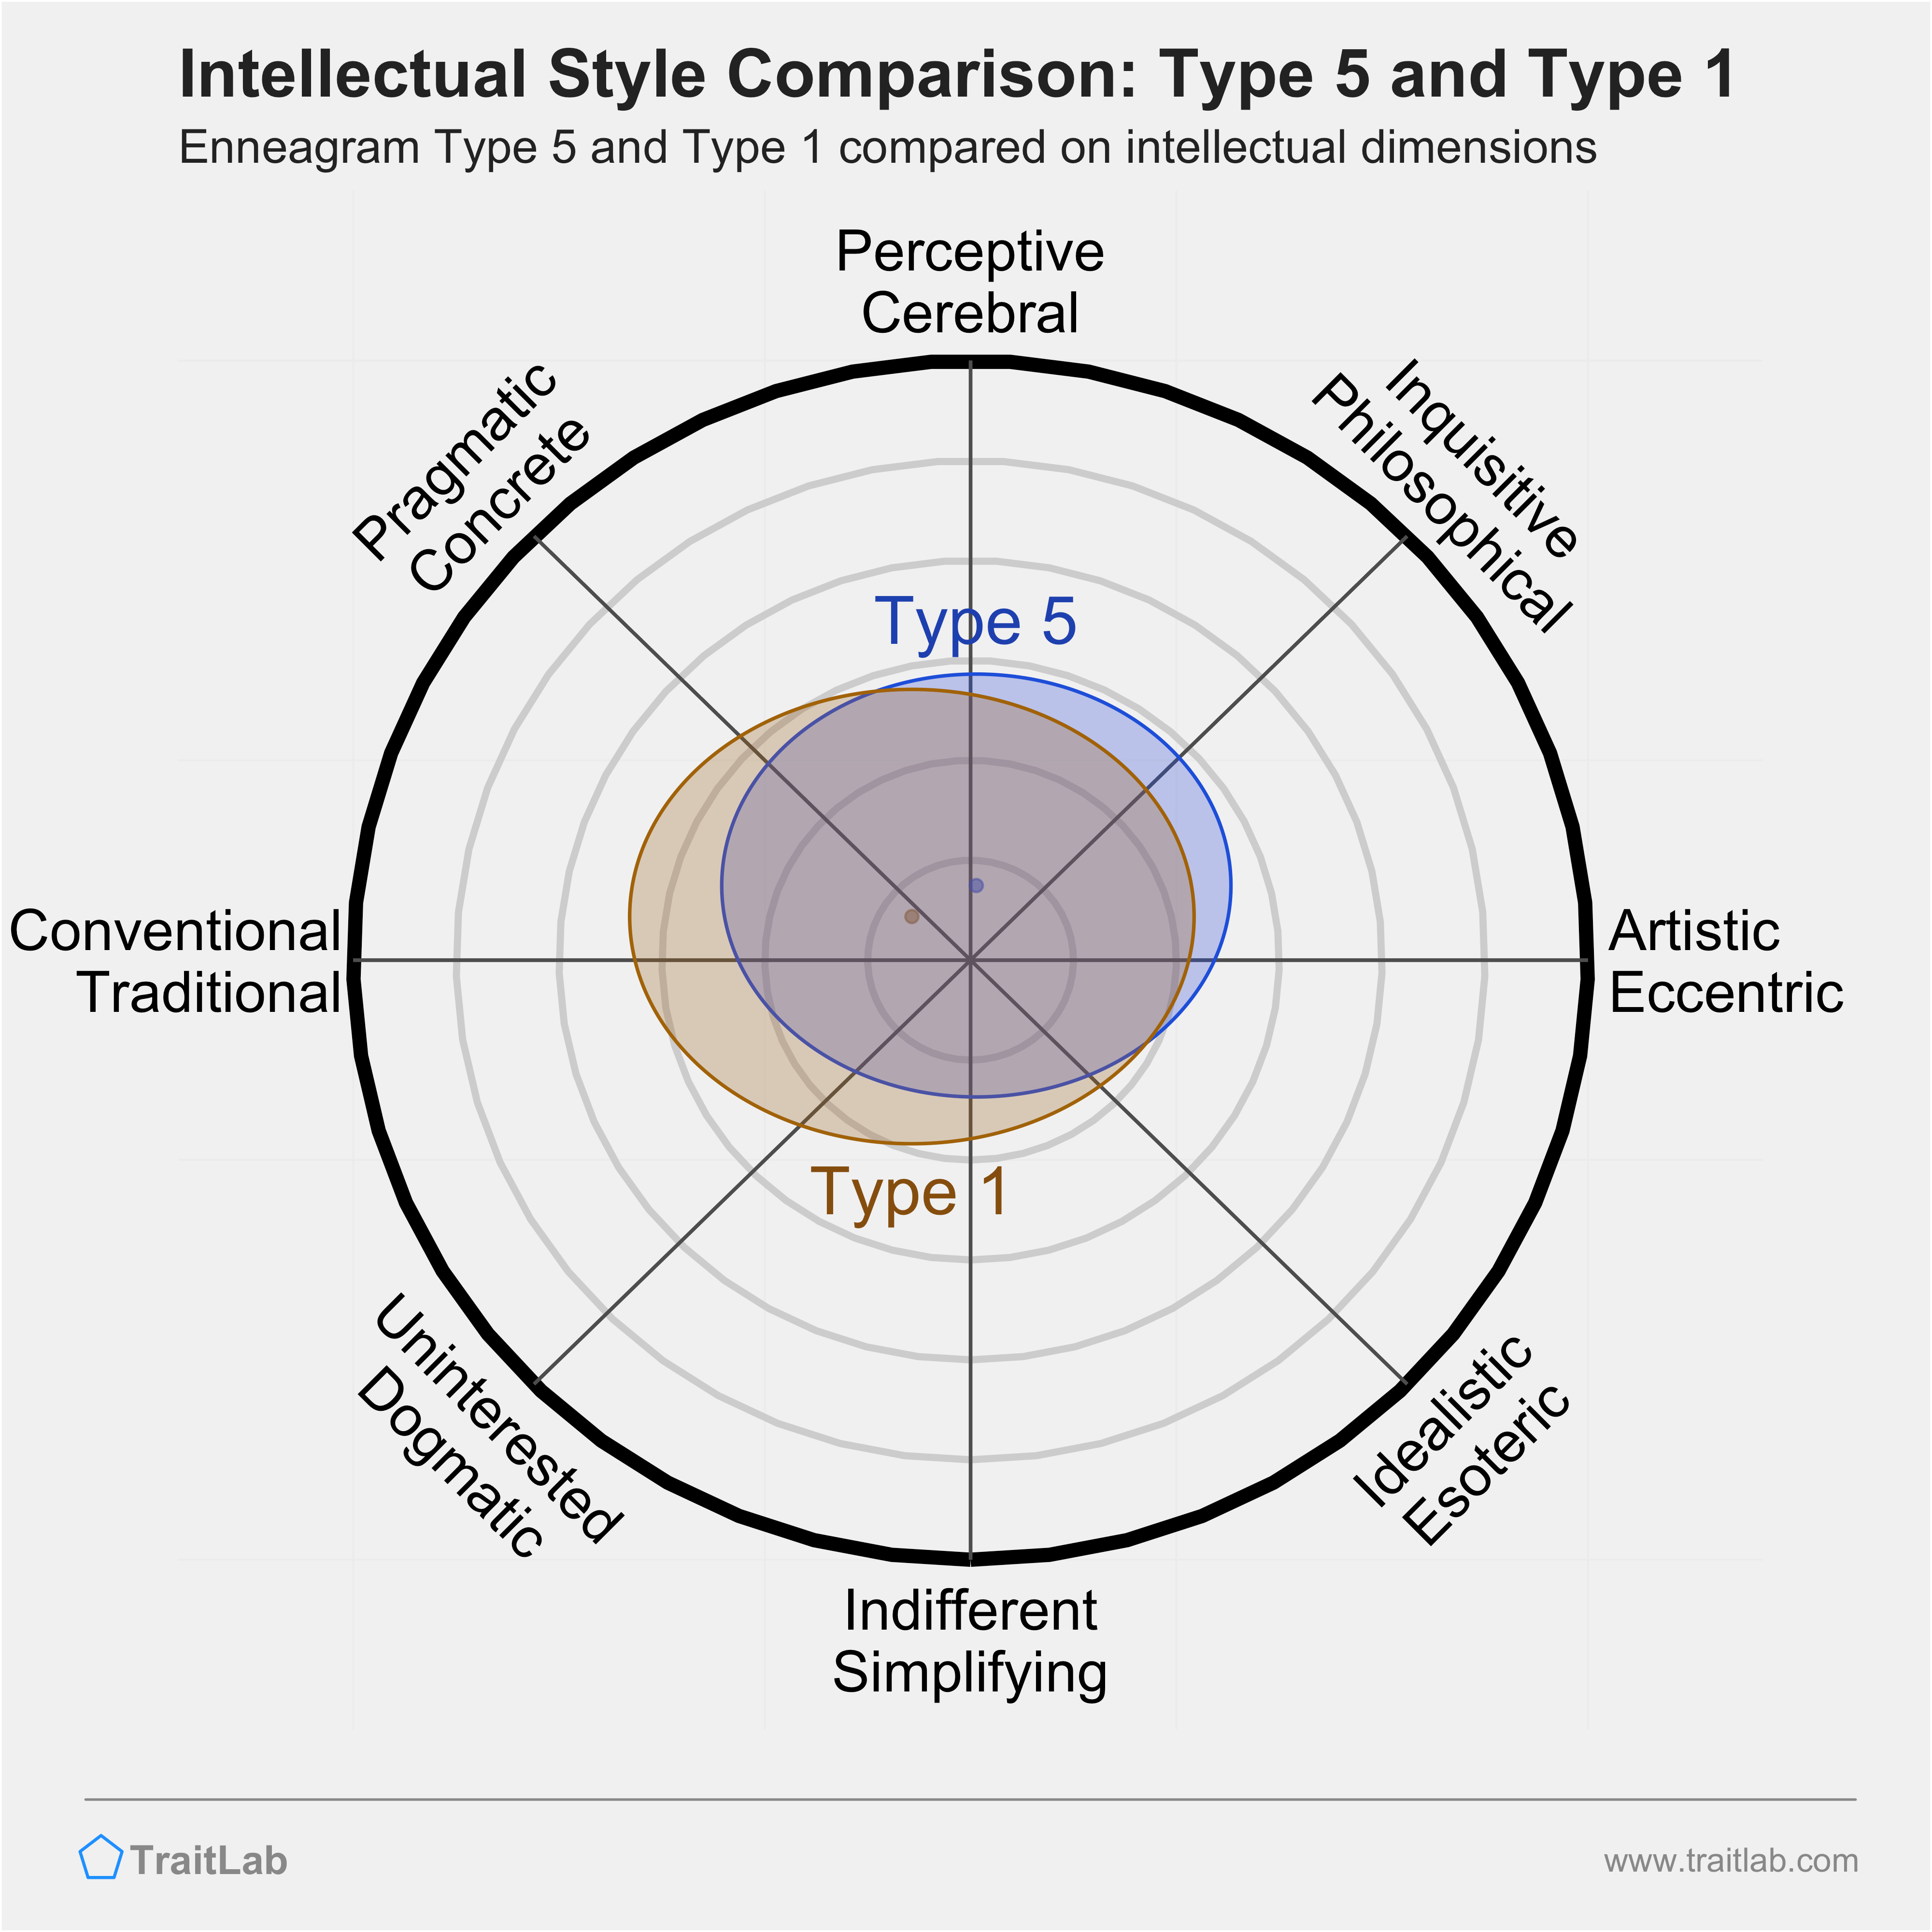 Type 5 and Type 1 comparison across intellectual dimensions